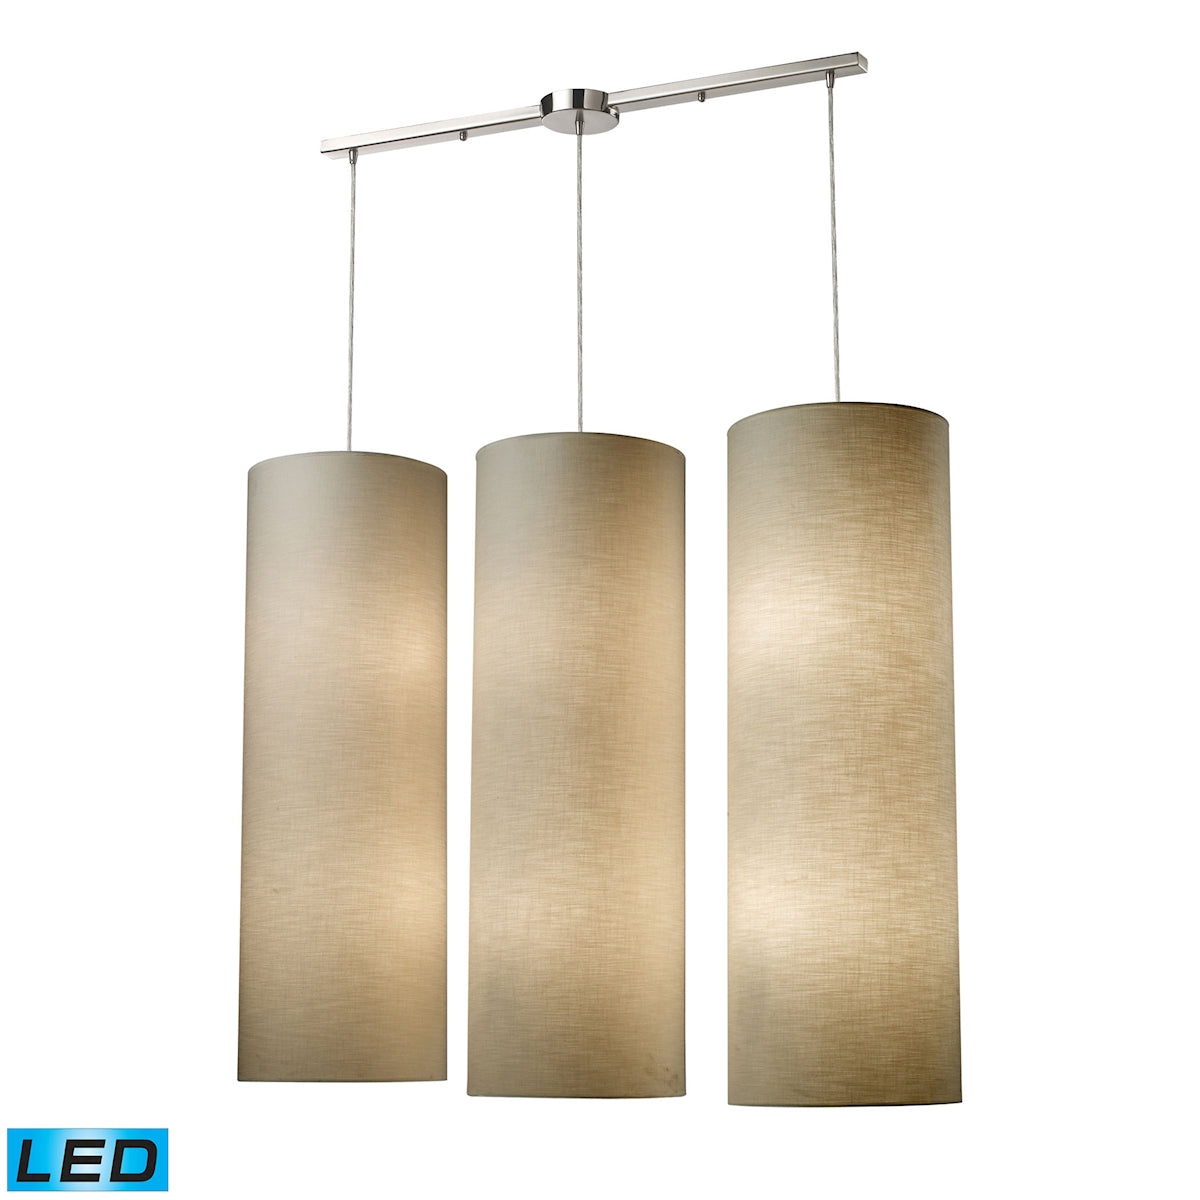 ELK Lighting 20160/12L-LED - Fabric Cylinders 12" Wide 12-Light Linear Pendant Fixture in Satin Nick